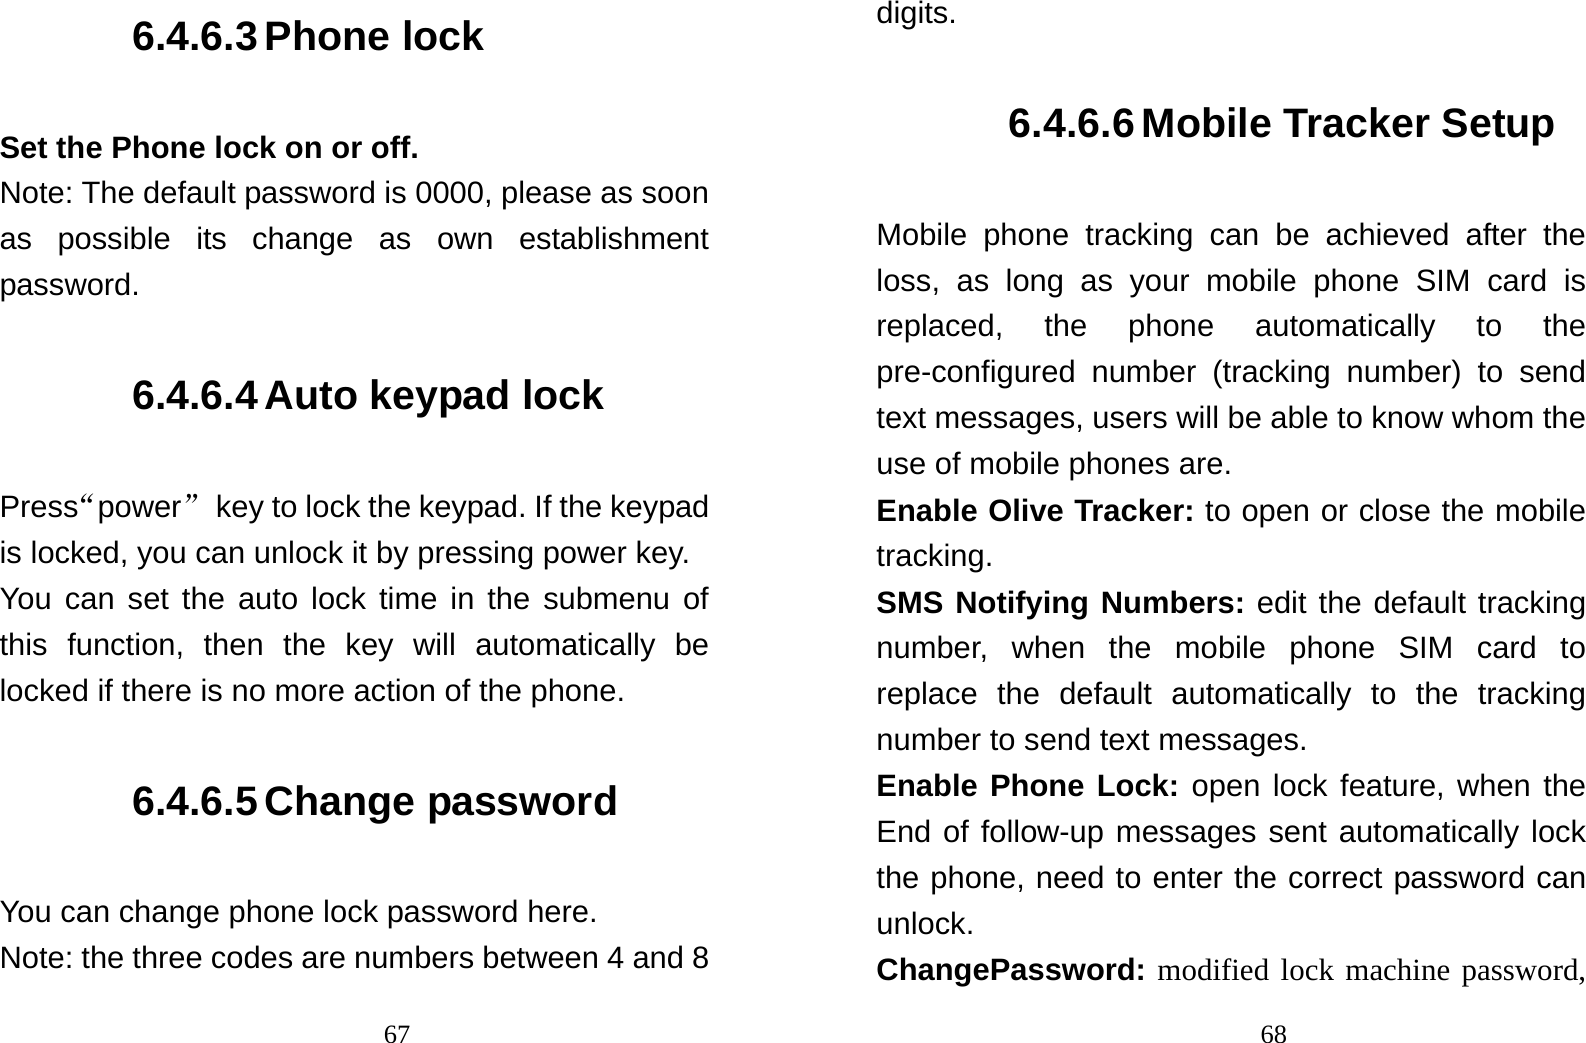                                676.4.6.3 Phone lock Set the Phone lock on or off. Note: The default password is 0000, please as soon as possible its change as own establishment password. 6.4.6.4 Auto keypad lock Press“power”  key to lock the keypad. If the keypad is locked, you can unlock it by pressing power key. You can set the auto lock time in the submenu of this function, then the key will automatically be locked if there is no more action of the phone. 6.4.6.5 Change password You can change phone lock password here. Note: the three codes are numbers between 4 and 8                                68digits. 6.4.6.6 Mobile Tracker Setup Mobile phone tracking can be achieved after the loss, as long as your mobile phone SIM card is replaced, the phone automatically to the pre-configured number (tracking number) to send text messages, users will be able to know whom the use of mobile phones are. Enable Olive Tracker: to open or close the mobile tracking.  SMS Notifying Numbers: edit the default tracking number, when the mobile phone SIM card to replace the default automatically to the tracking number to send text messages.   Enable Phone Lock: open lock feature, when the End of follow-up messages sent automatically lock the phone, need to enter the correct password can unlock.                                   ChangePassword: modified lock machine password, 